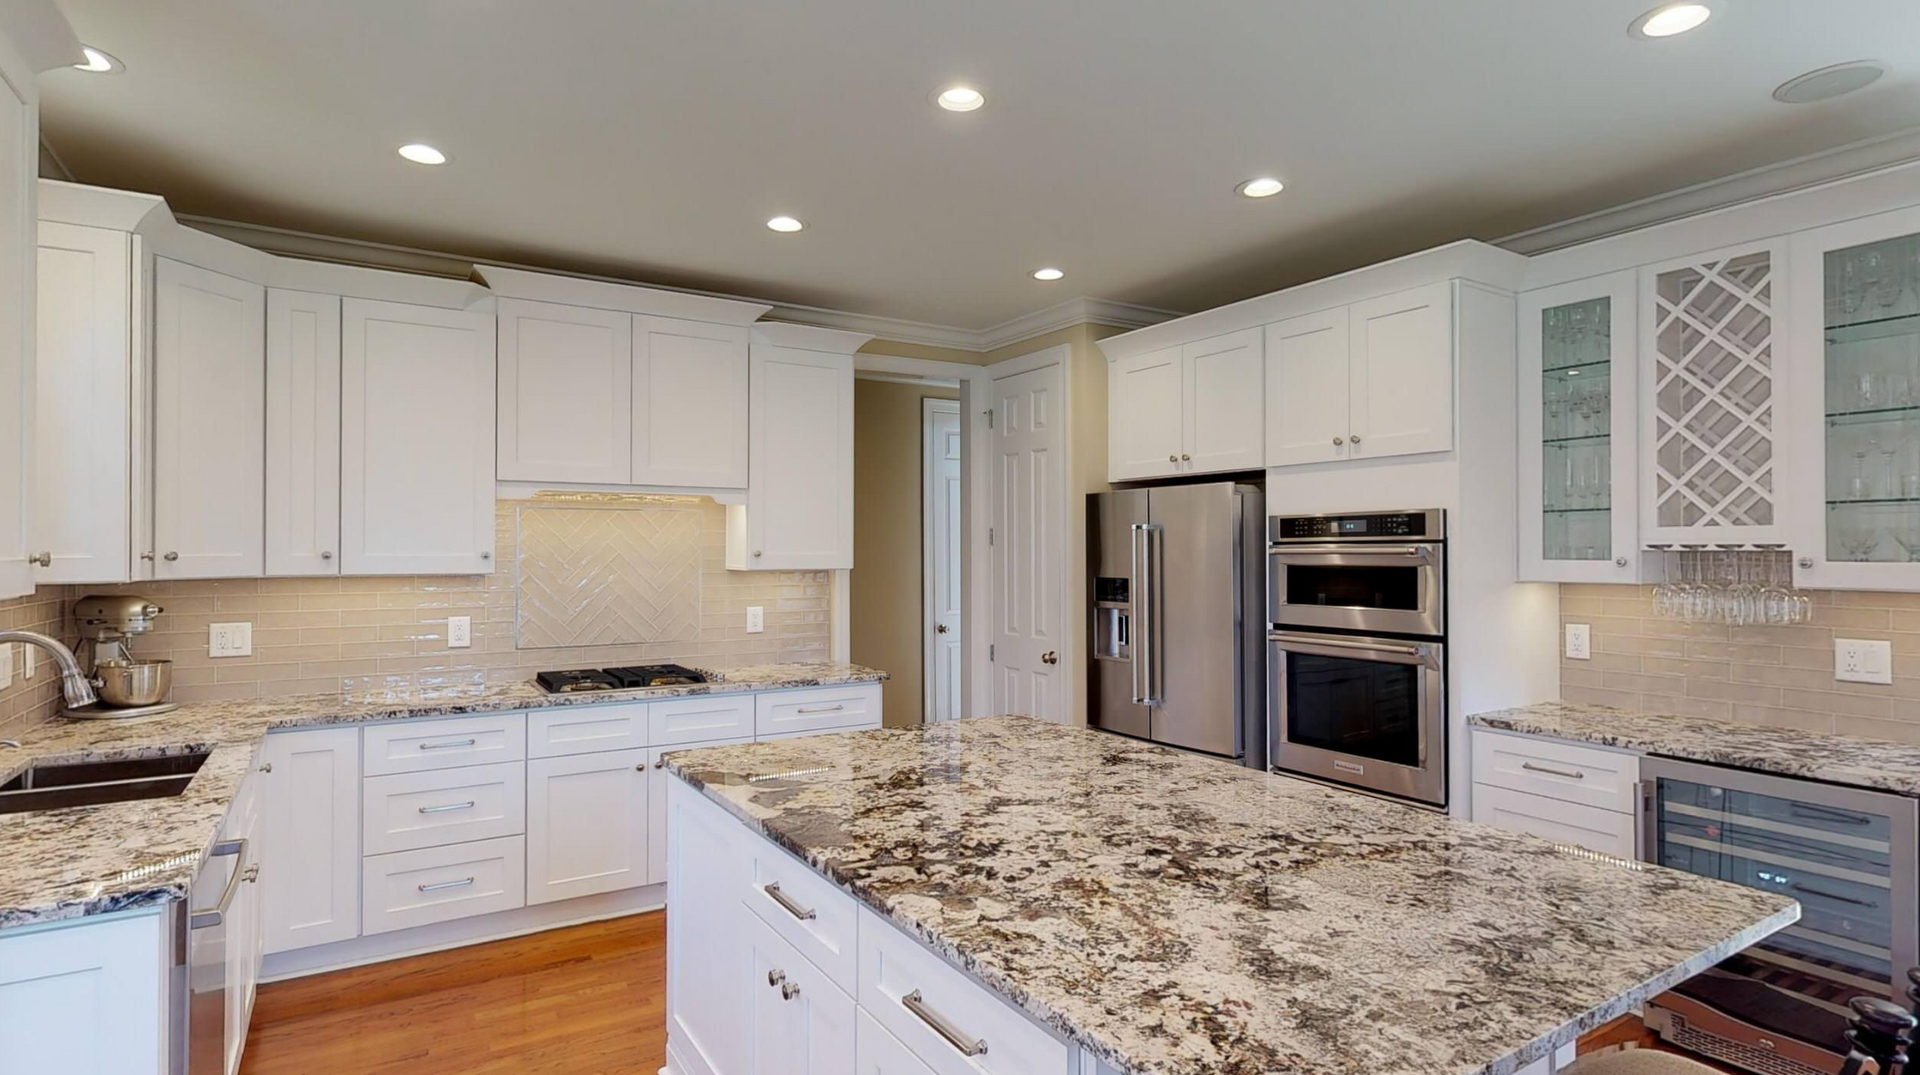 A kitchen with white cabinets and granite counter tops